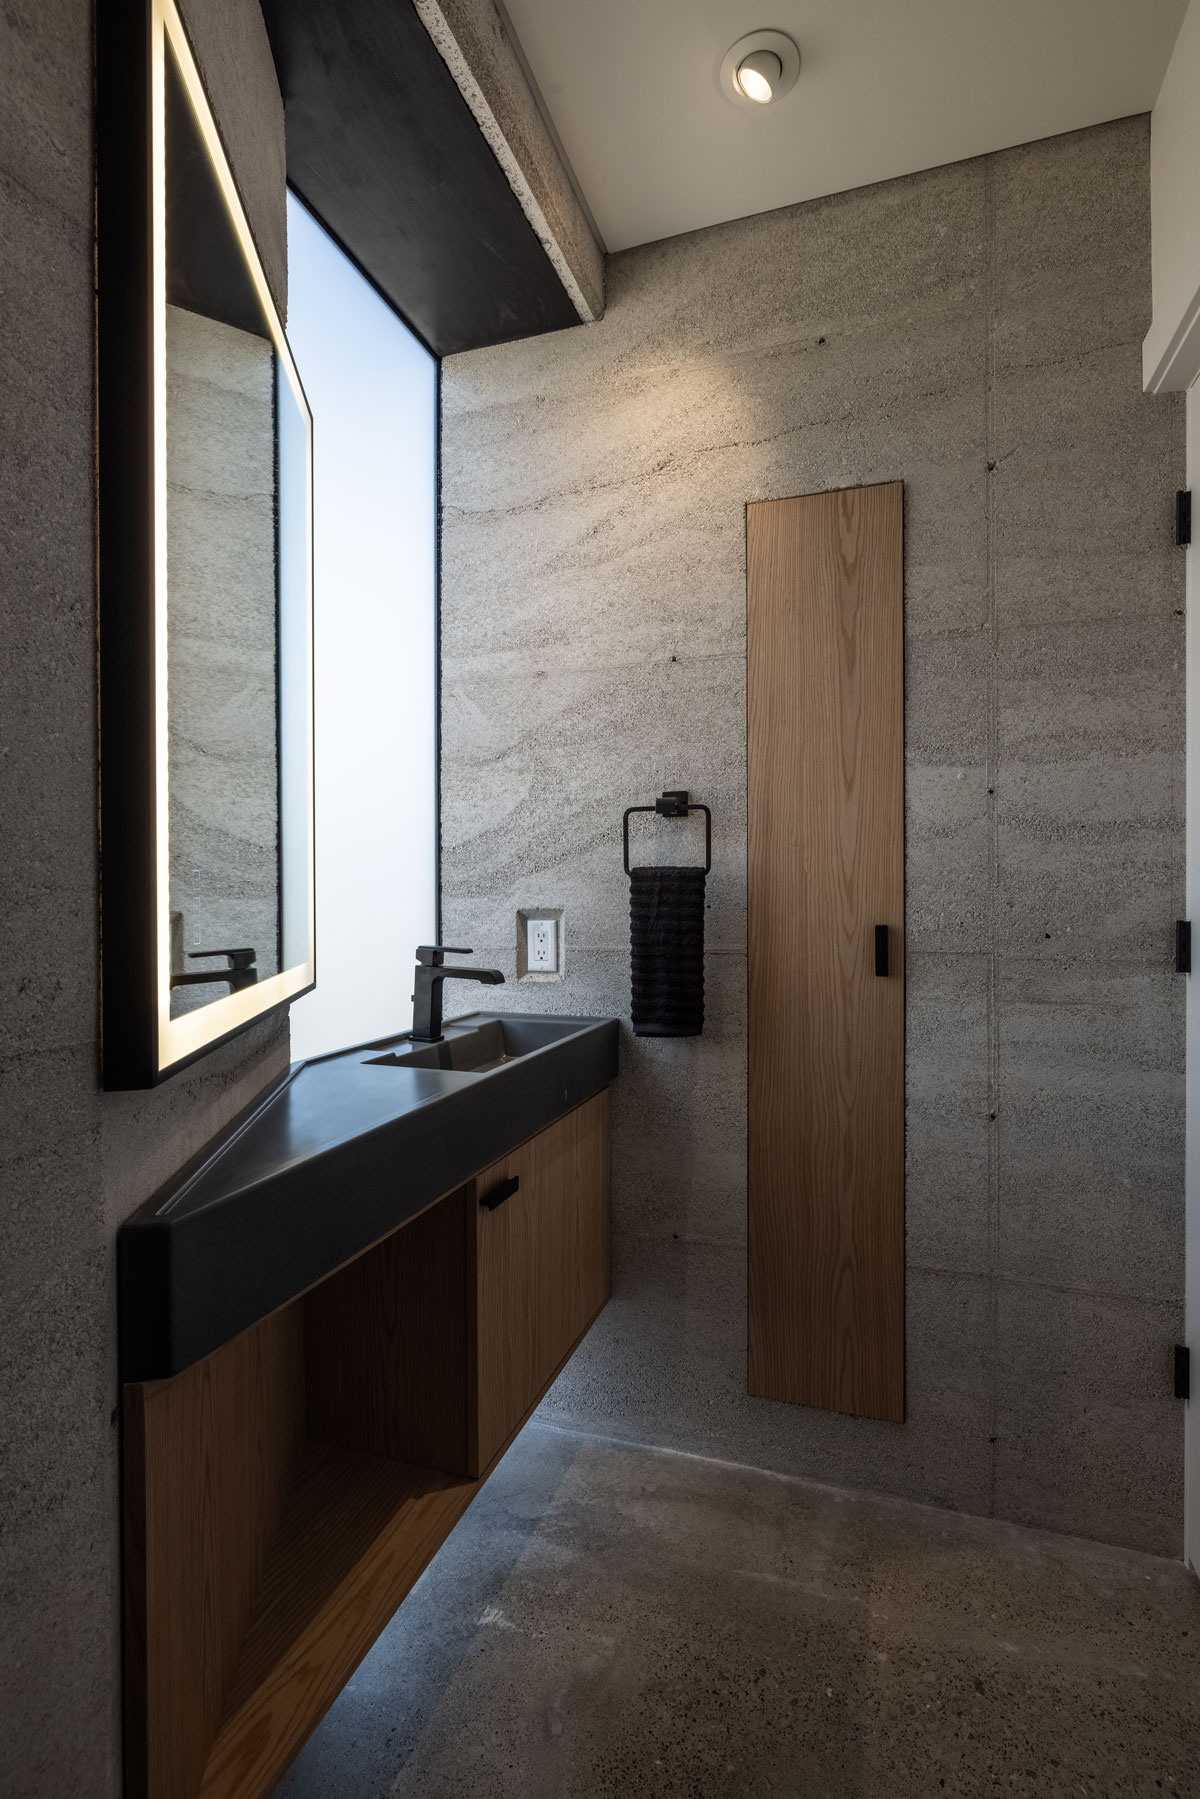 The powder bath in the rammed earth cabin, featuring a stunning concrete sink